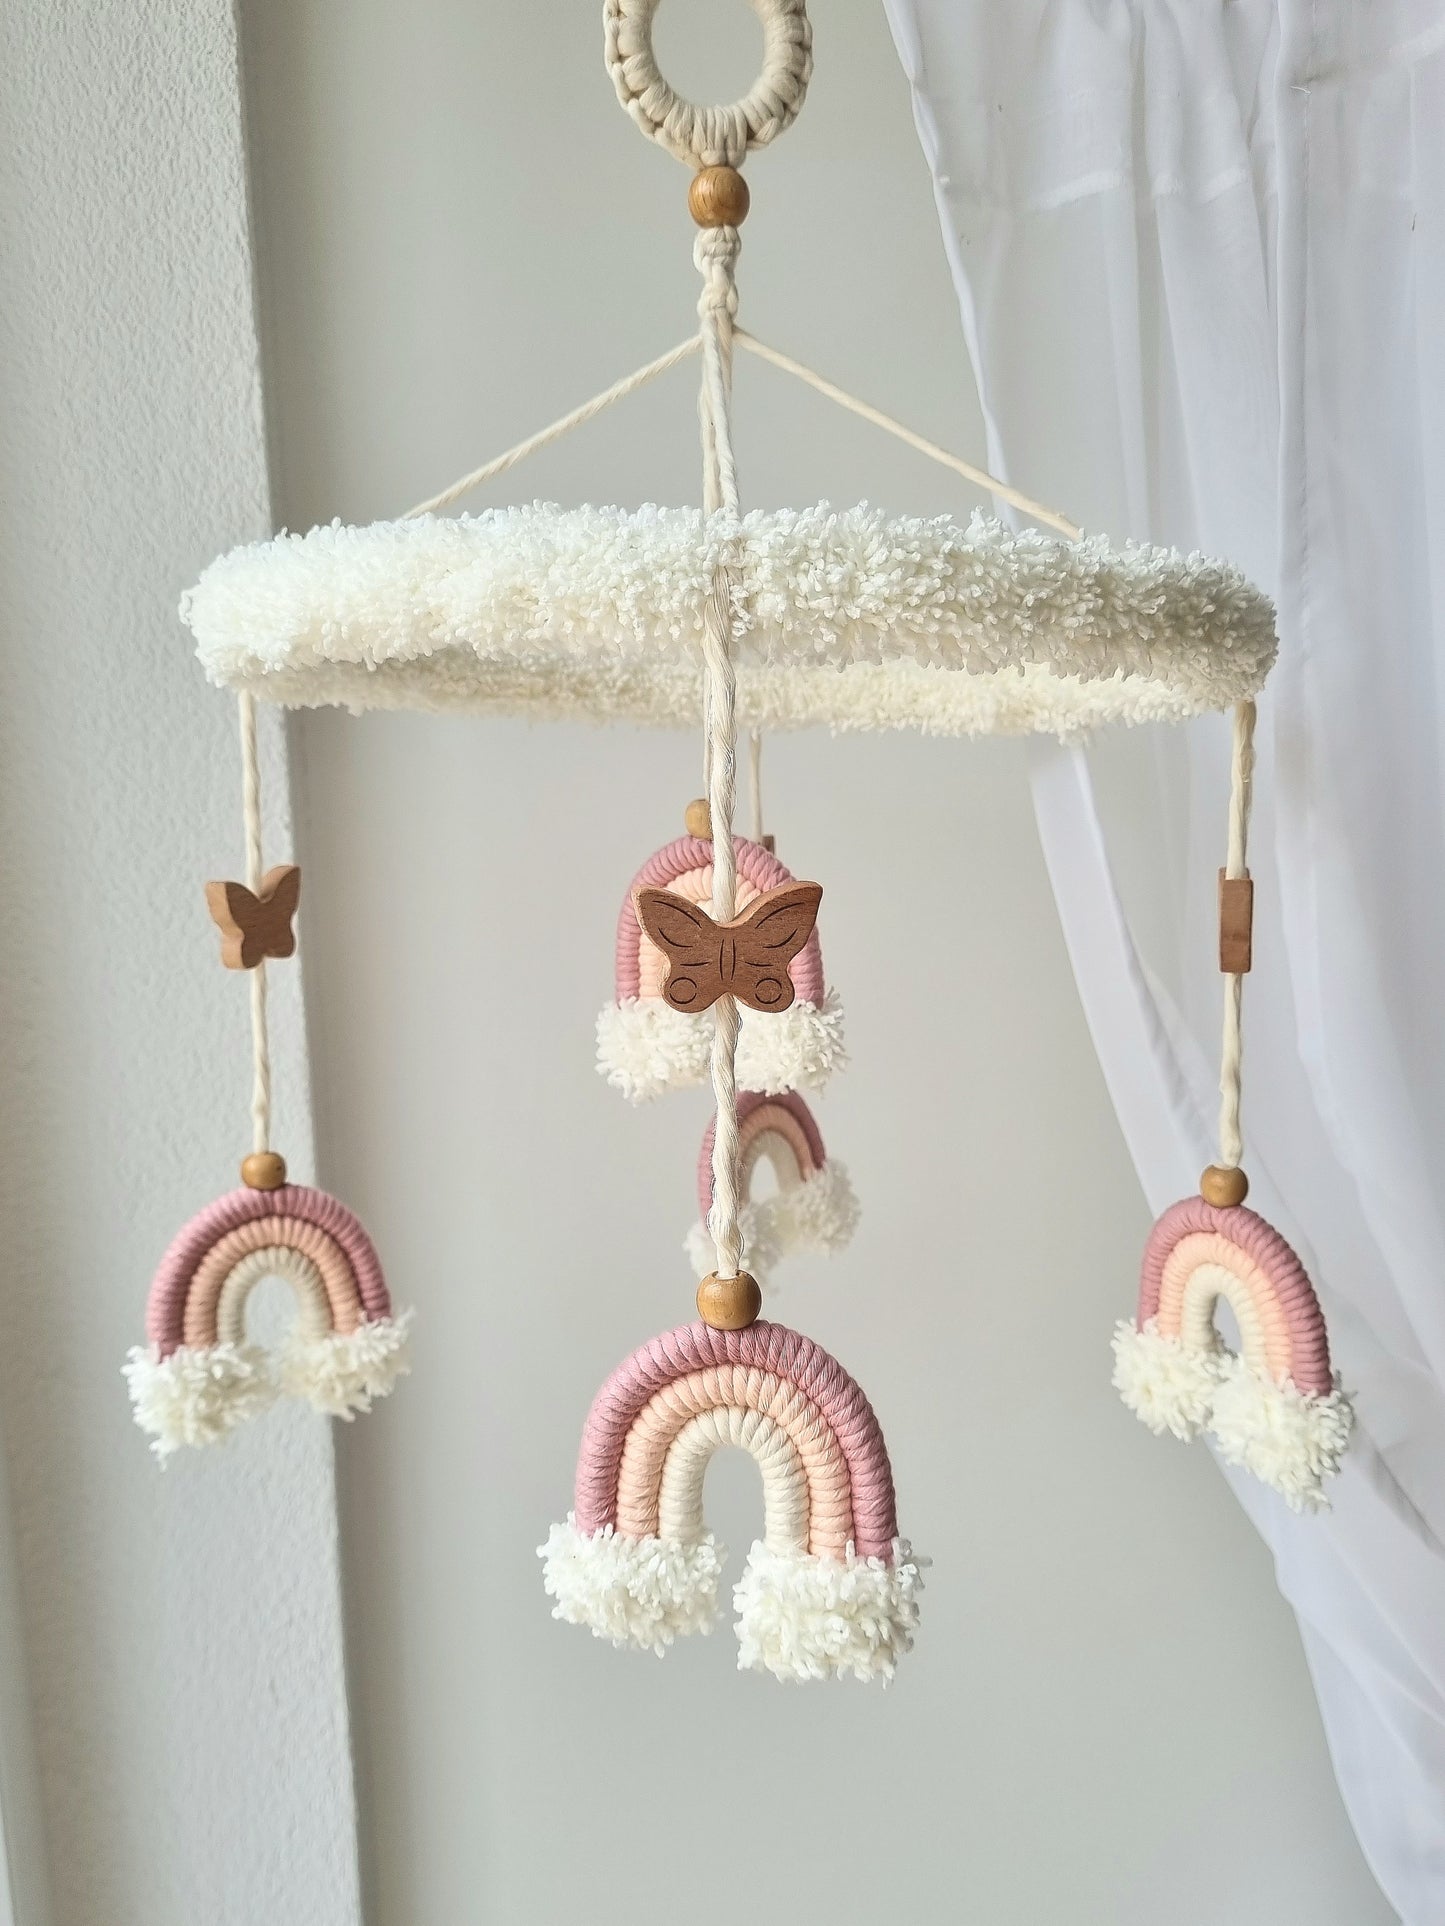 Baby Mobile Makramee Puffel rosa/weiss